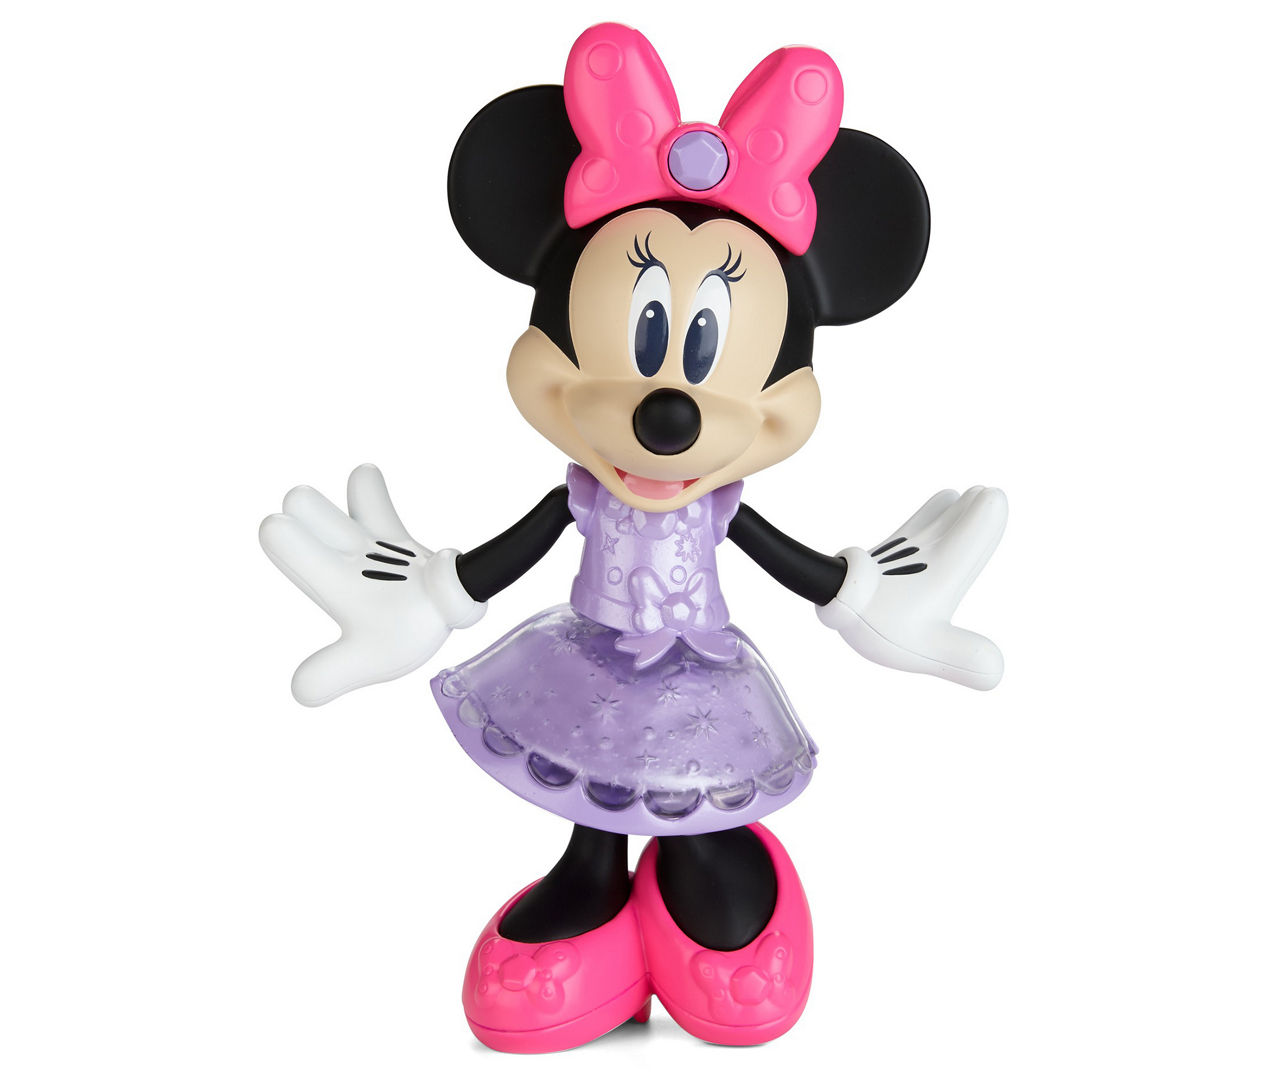 bal Bij zonsopgang Wees tevreden Fisher-Price Minnie Mouse Sparkle Surprise Doll | Big Lots